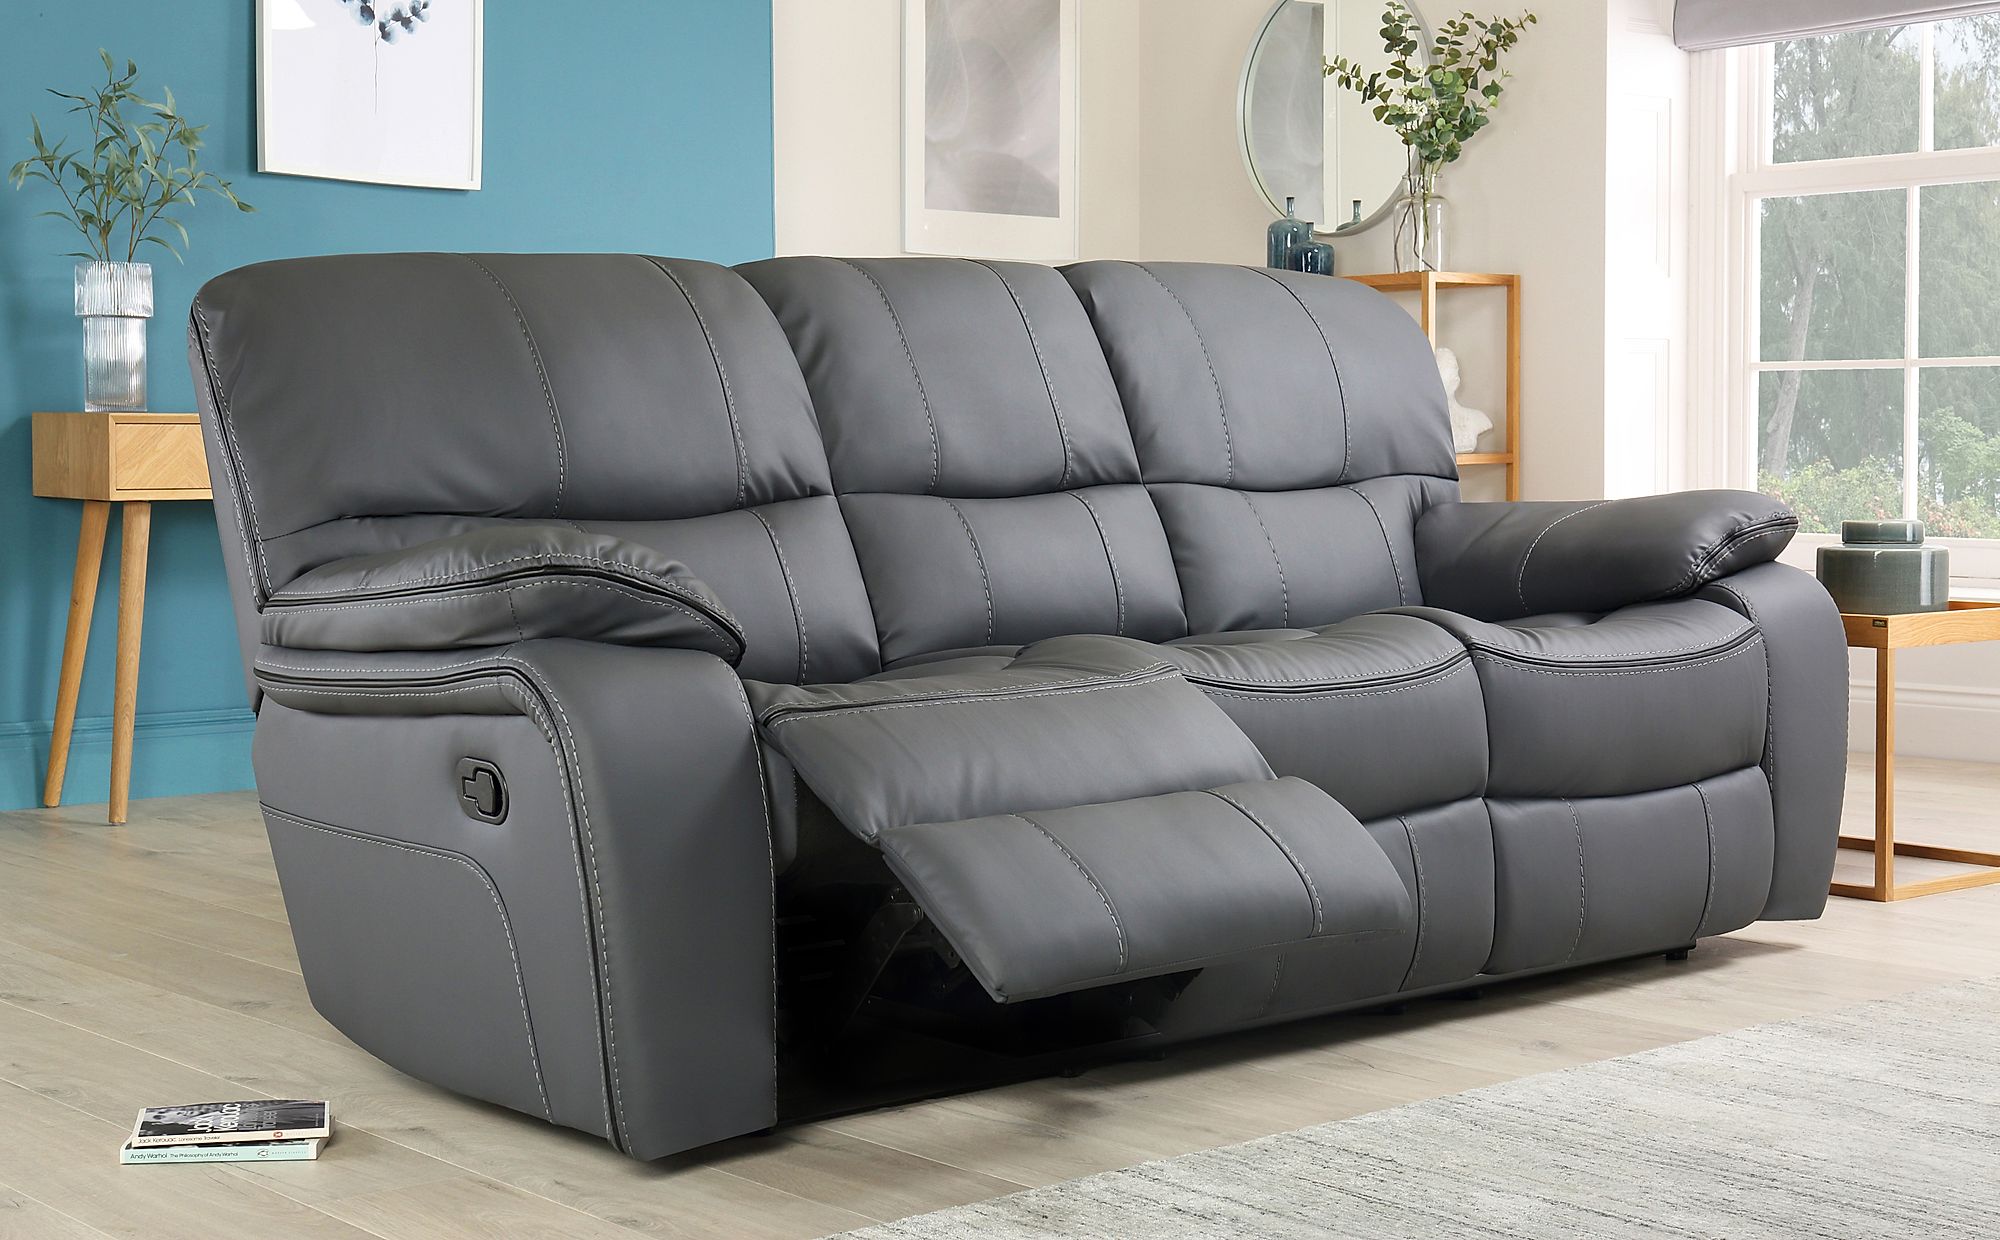 Beaumont Grey Leather 3 Seater Recliner Sofa Furniture